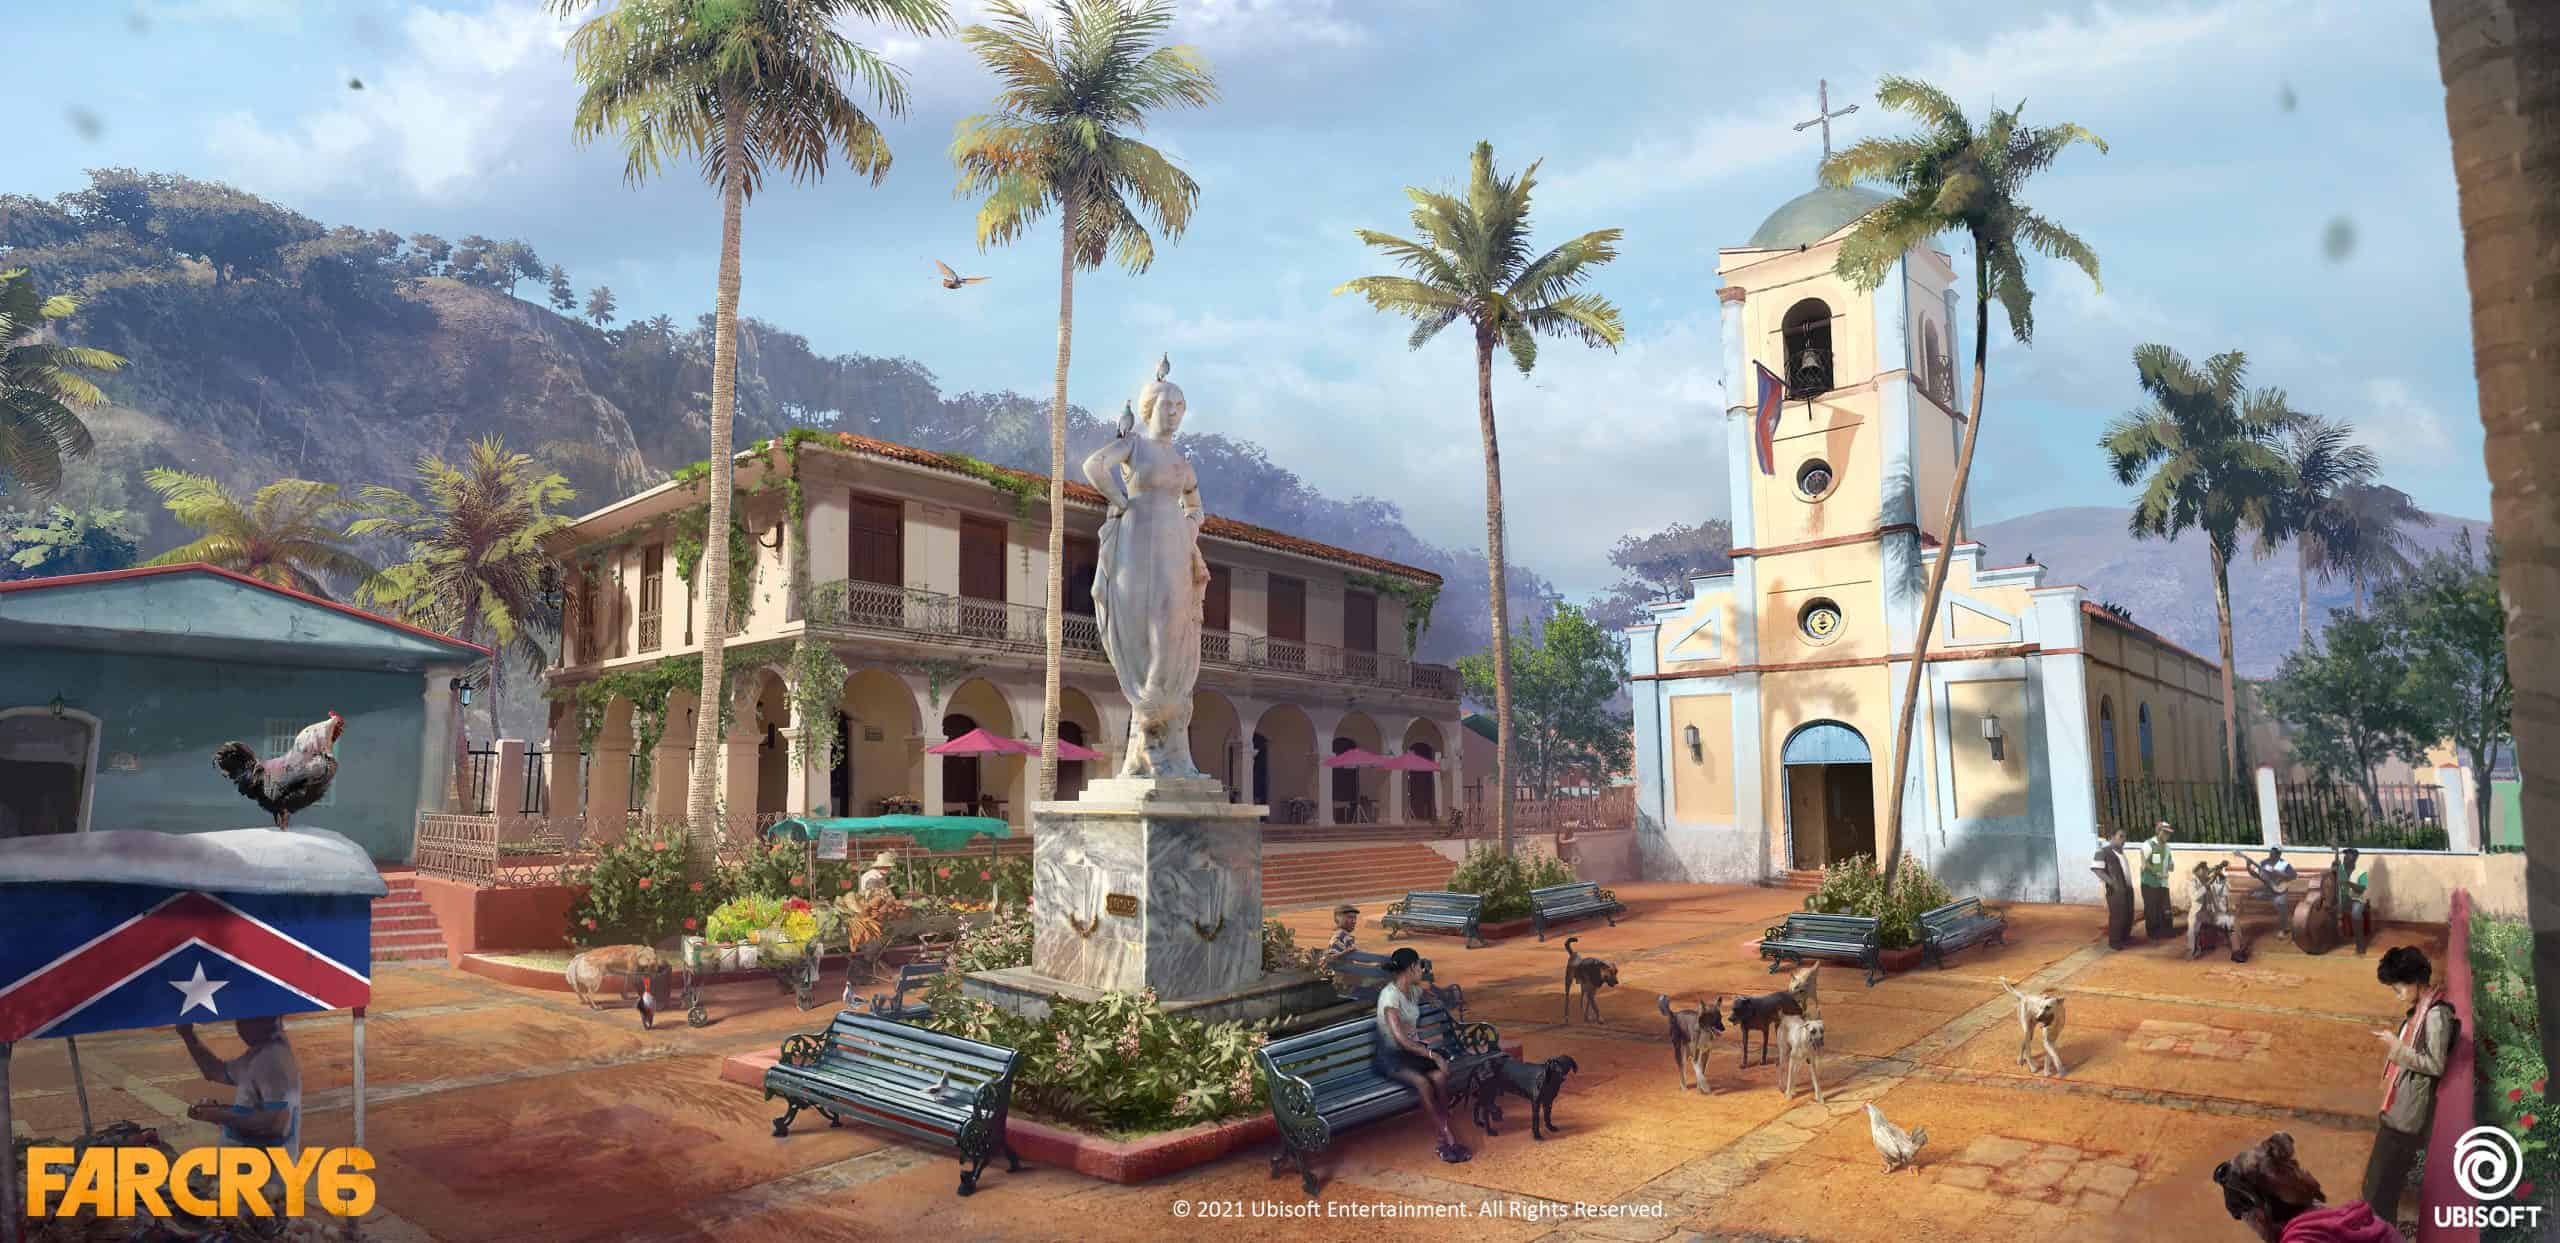 Market square with palm trees and statue